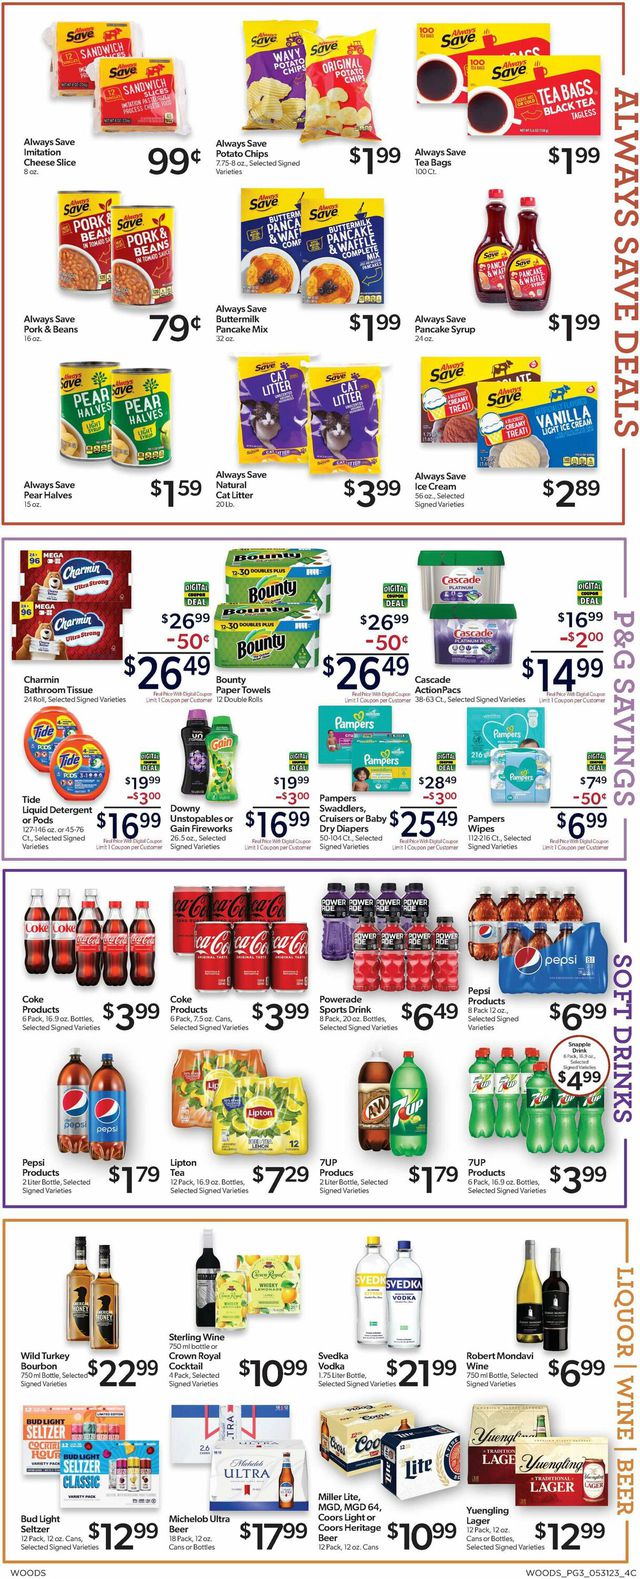 Woods Supermarket Ad from 05/31/2023